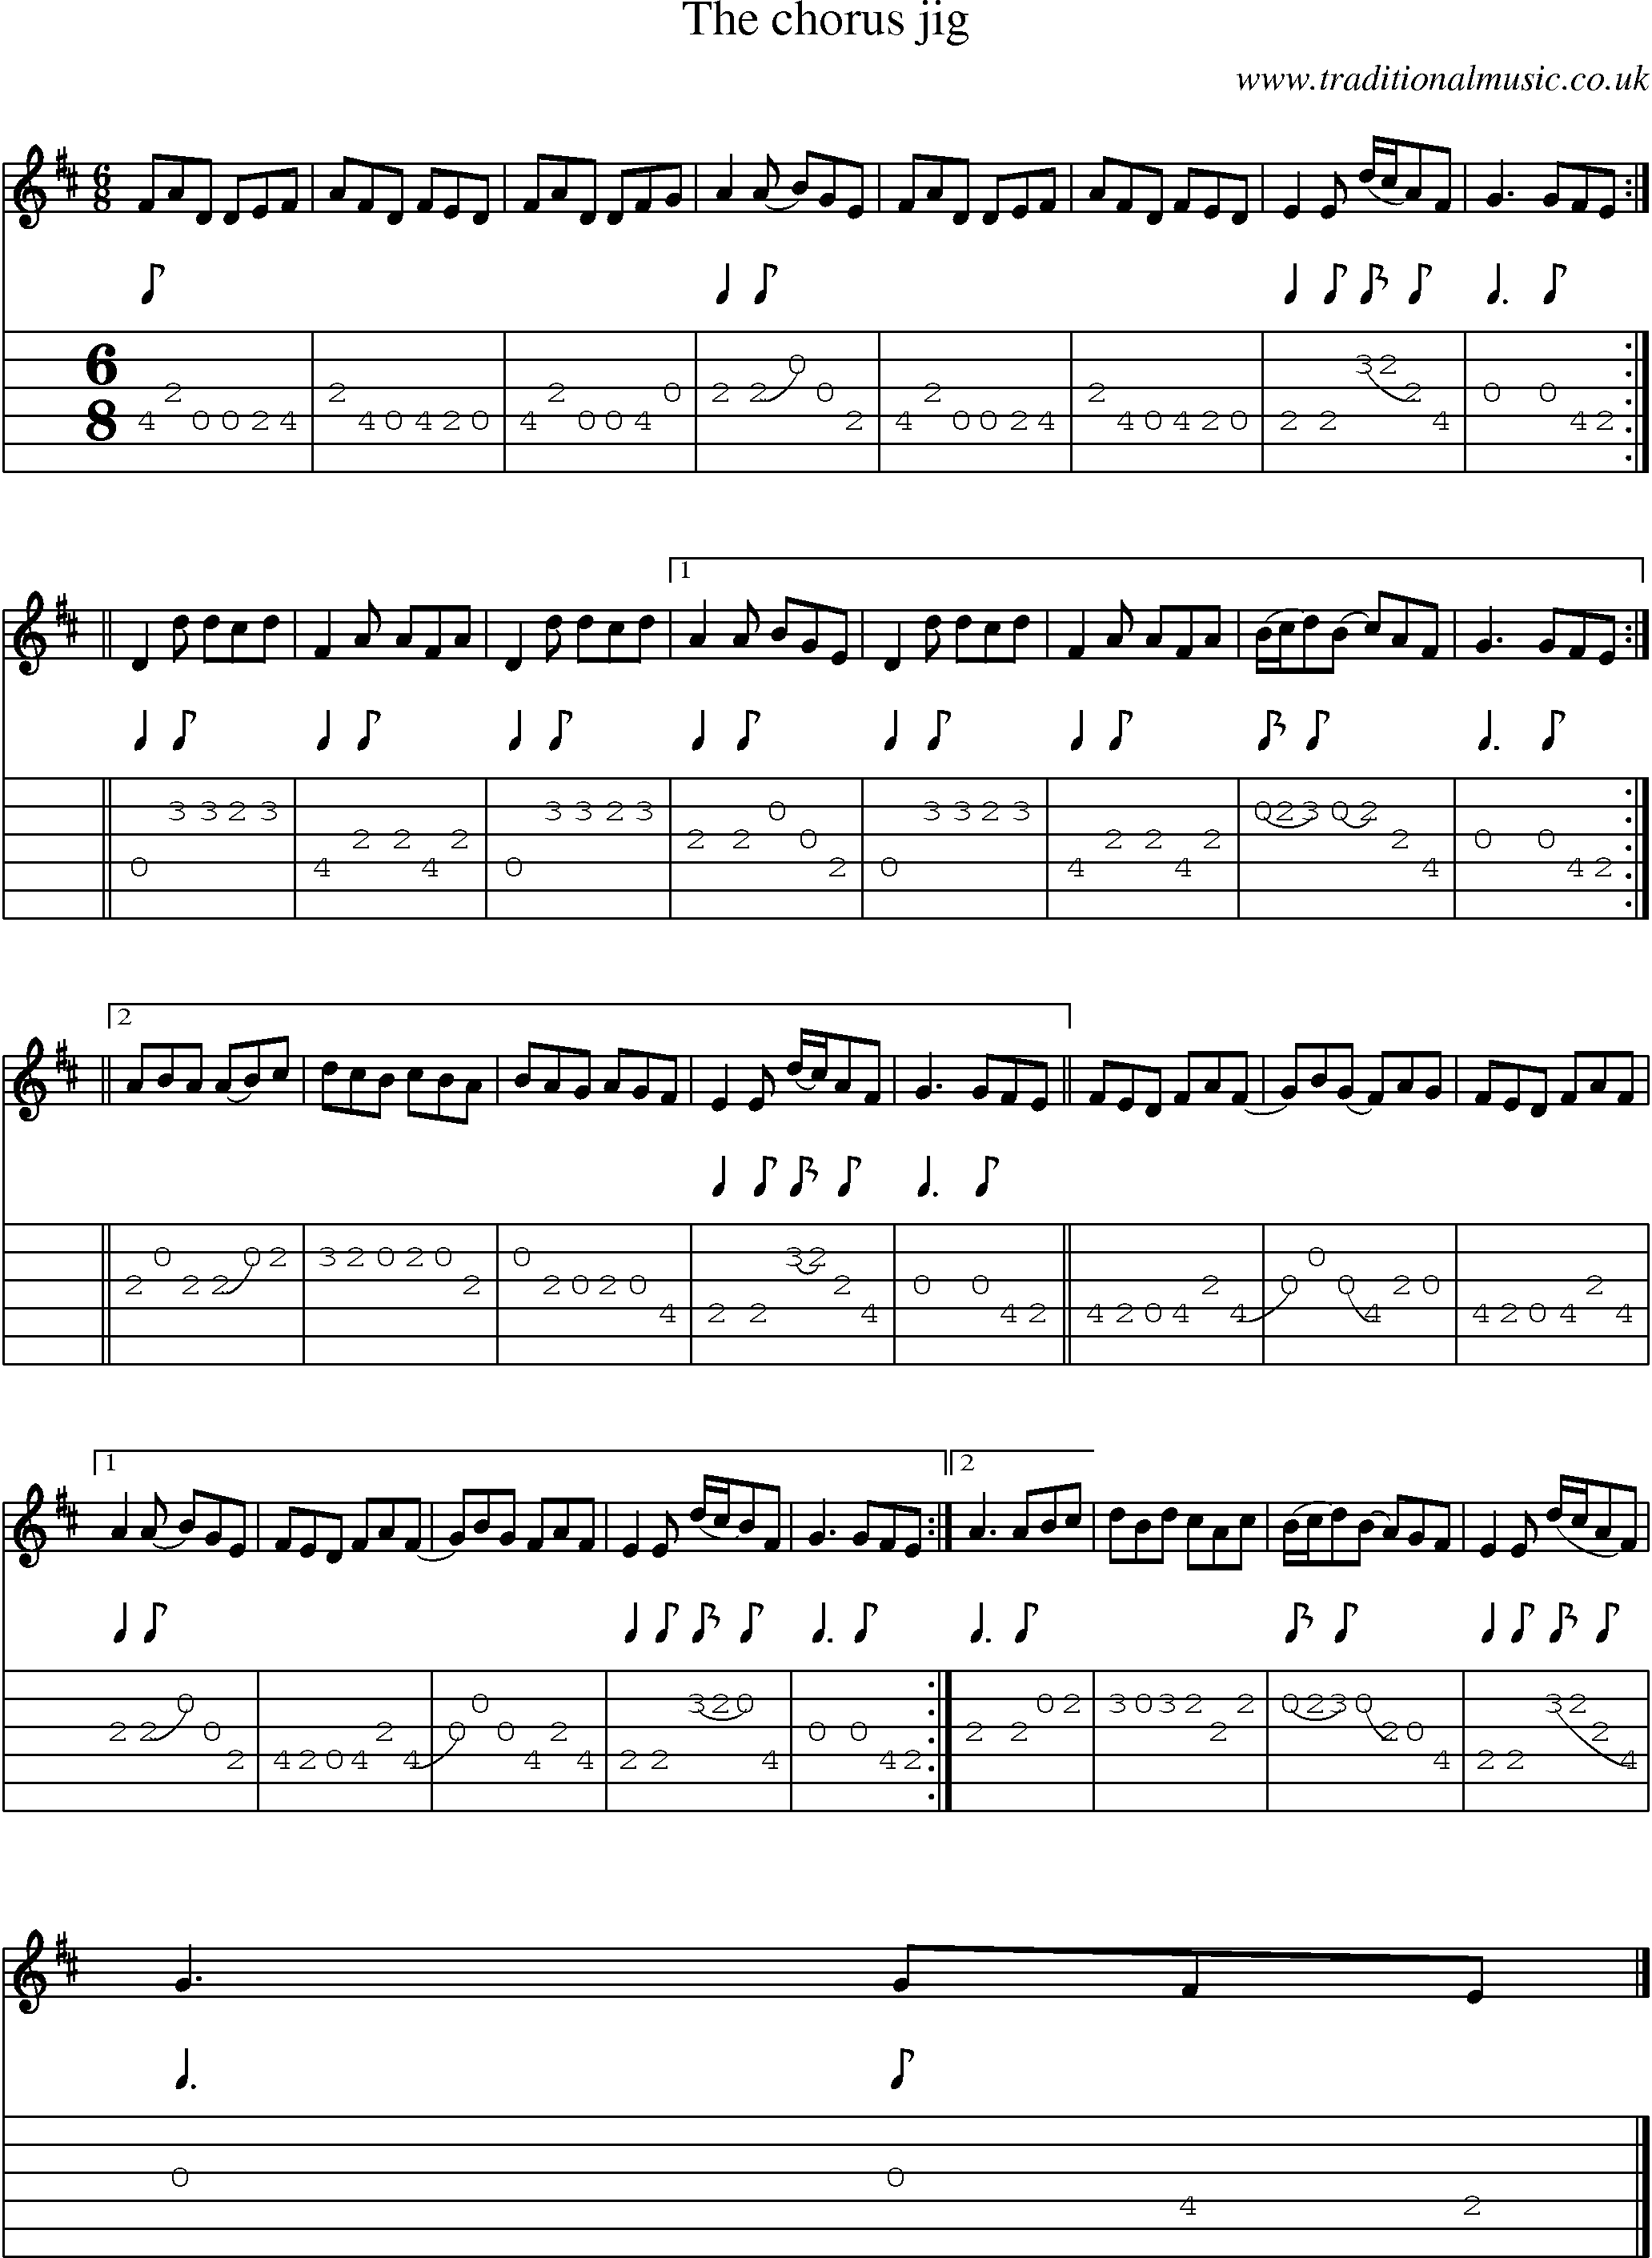 Music Score and Guitar Tabs for Chorus Jig